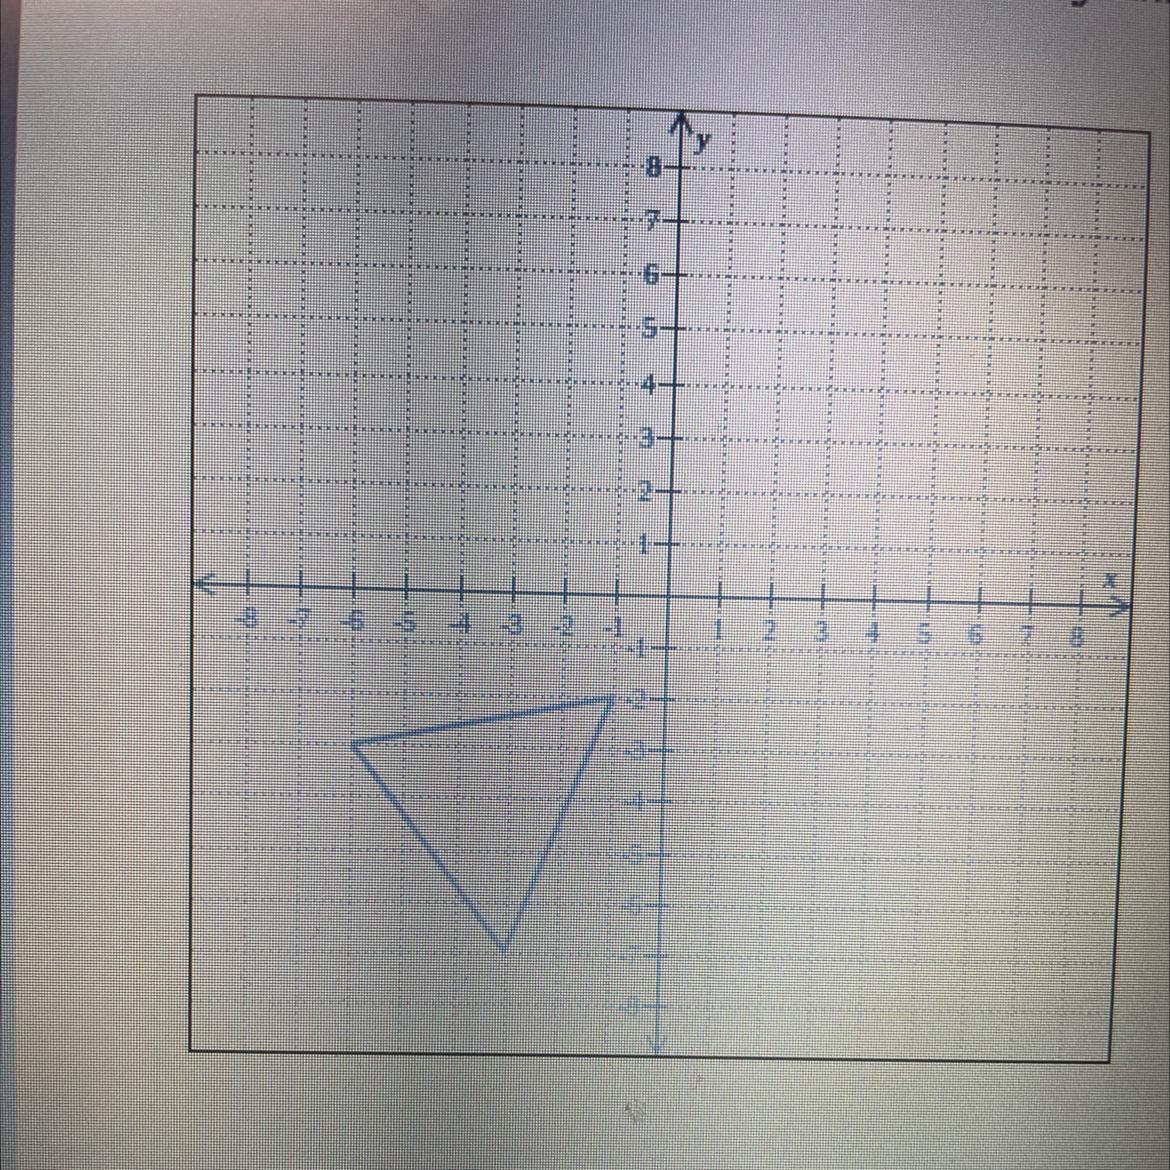 Draw The Reflection Of The Triangle Across The Y Axis